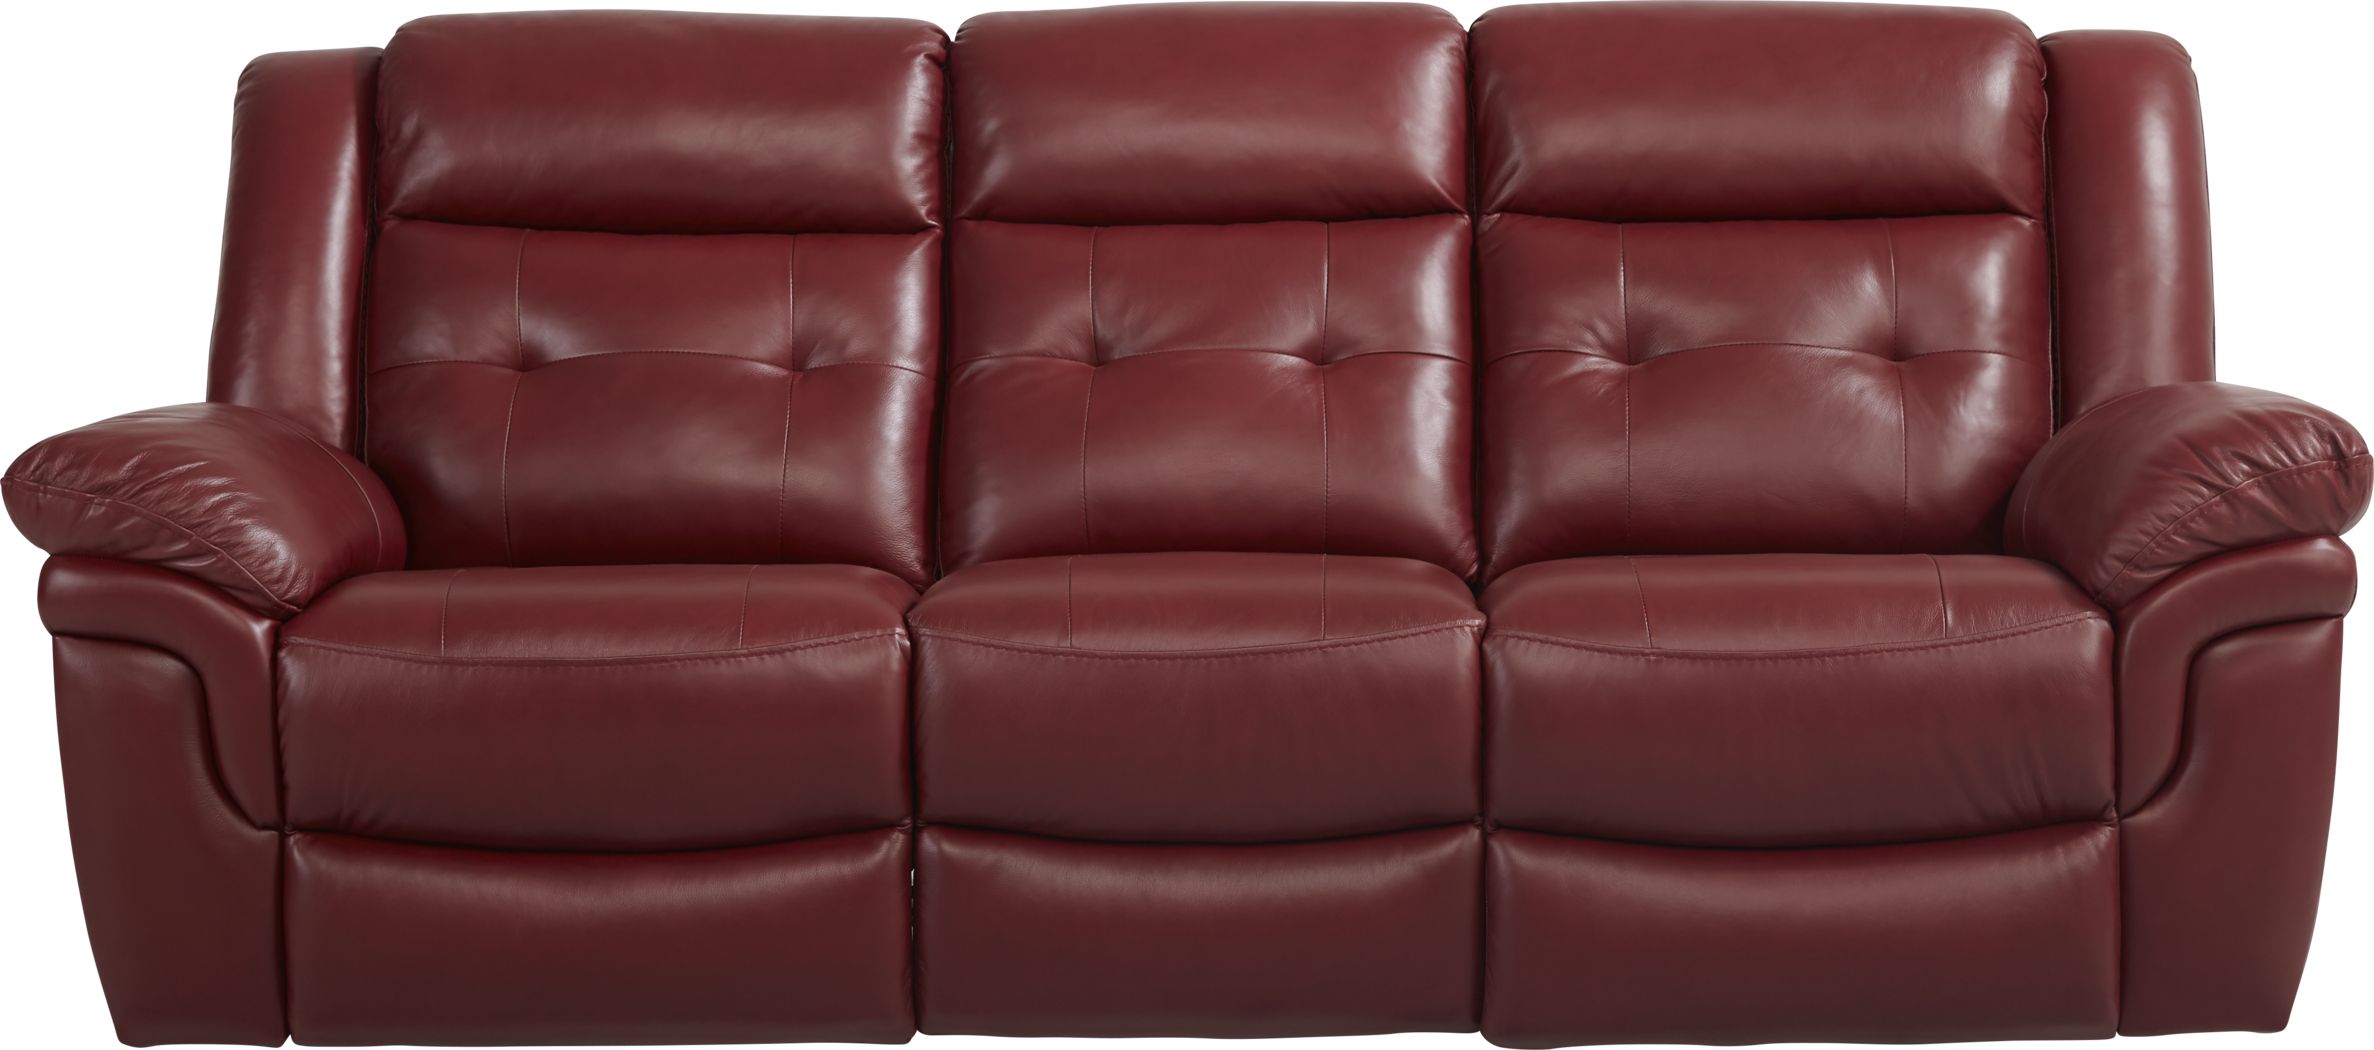 Ventoso Red Leather Power Reclining, Red Leather Sofa Recliner